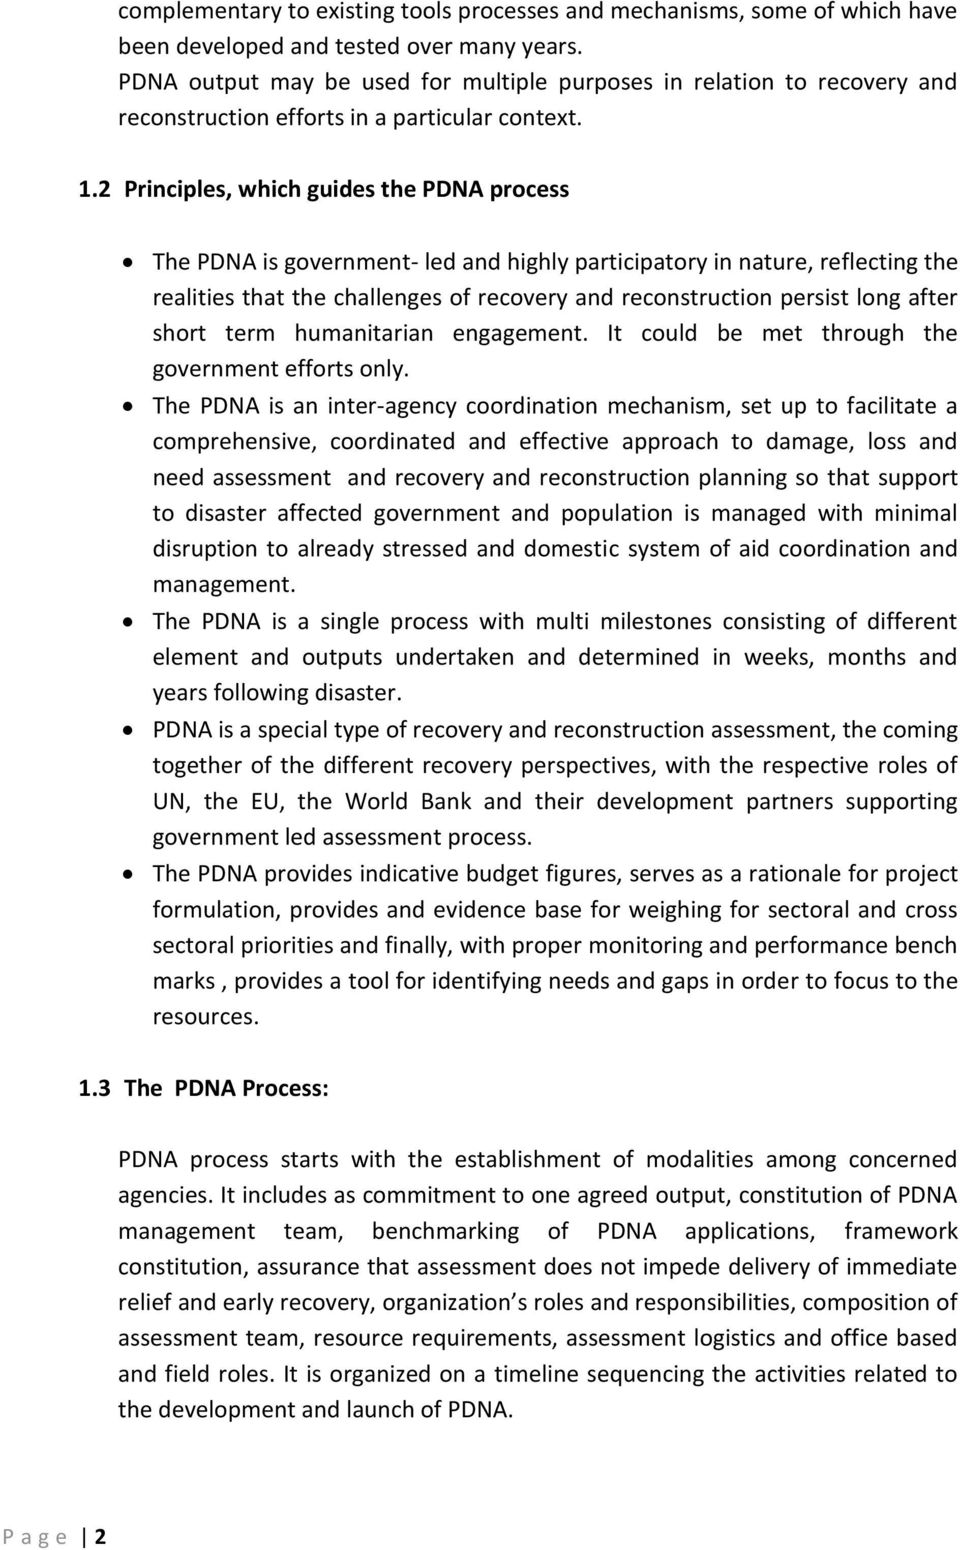 2 Principles, which guides the PDNA process The PDNA is government- led and highly participatory in nature, reflecting the realities that the challenges of recovery and reconstruction persist long